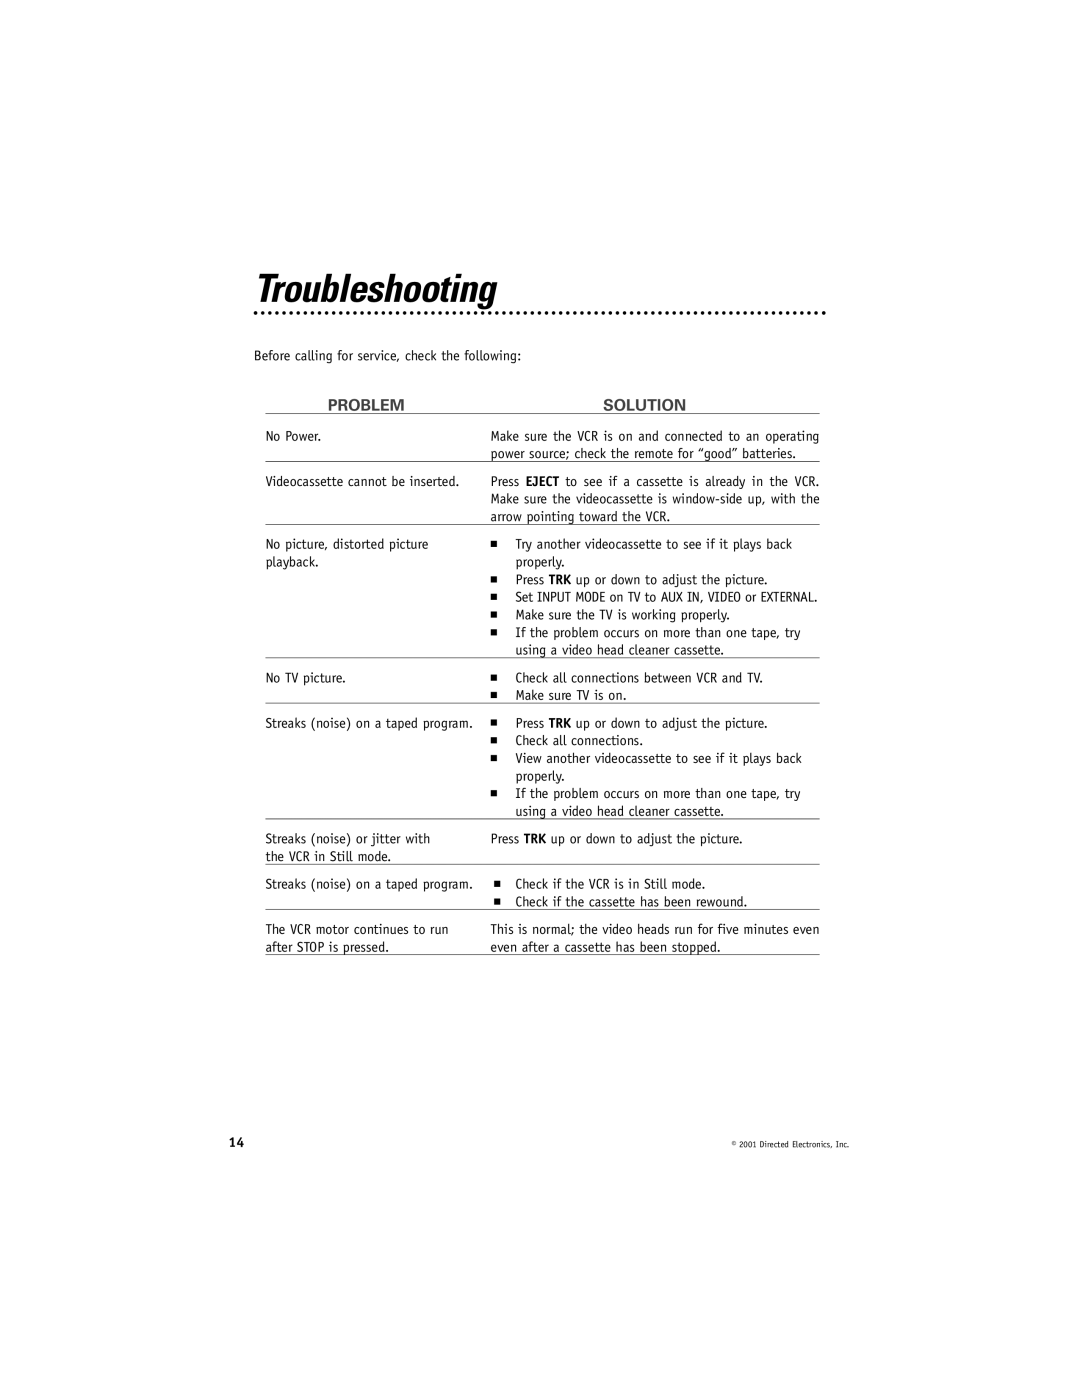 Directed Electronics VC2010 manual Troubleshooting, Problem, Solution 